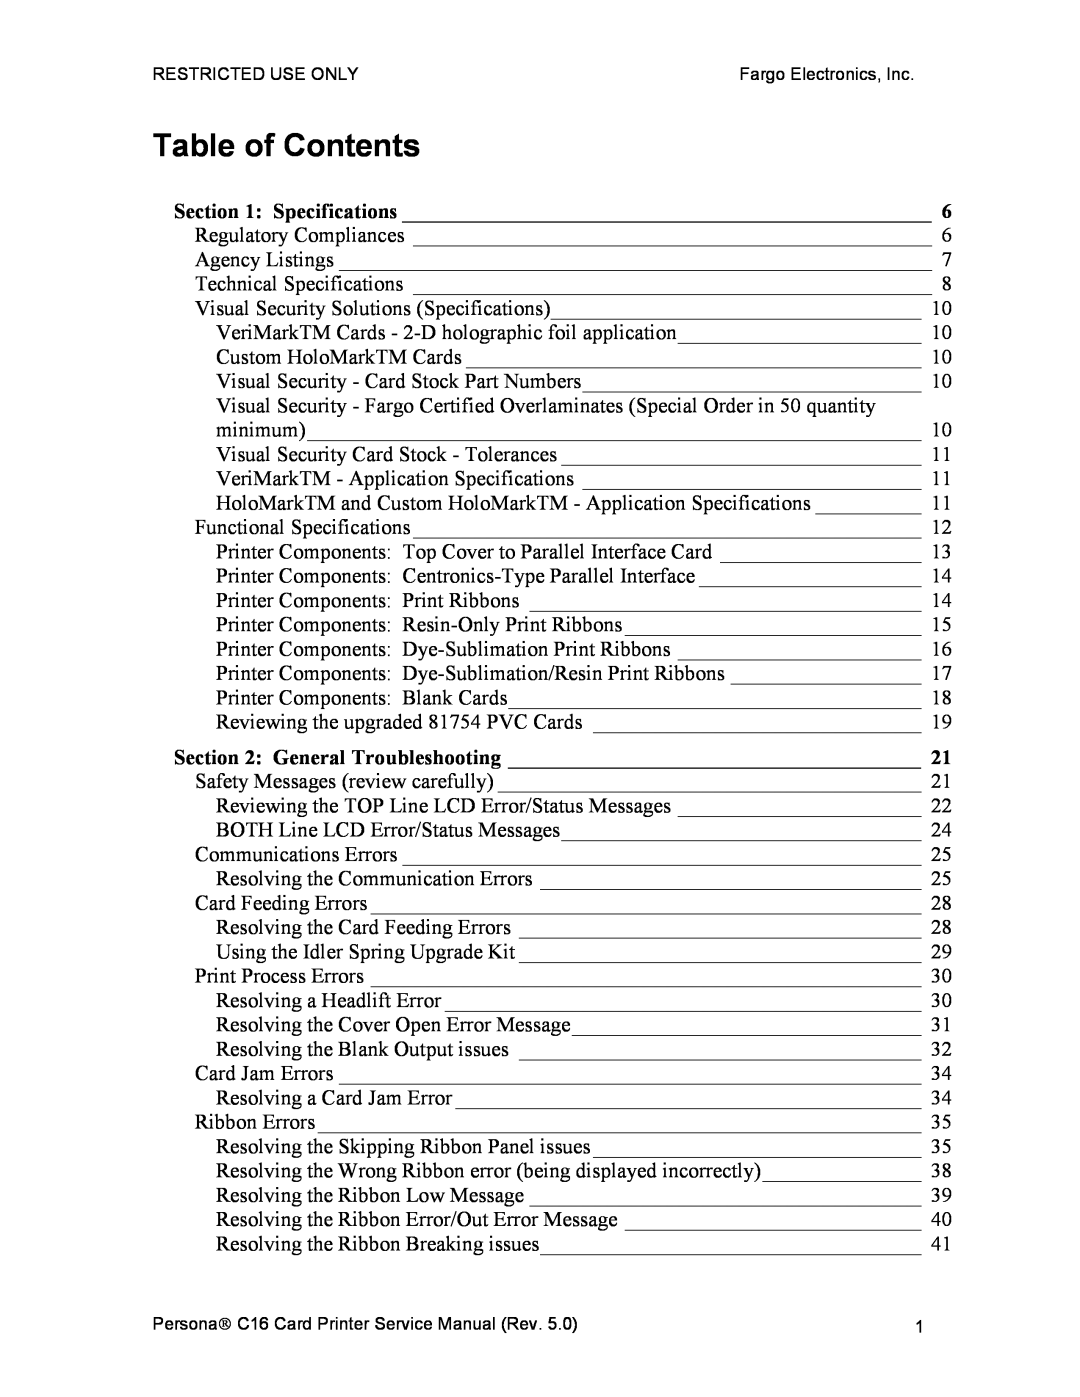 FARGO electronic C16 service manual Table of Contents, Specifications, General Troubleshooting 